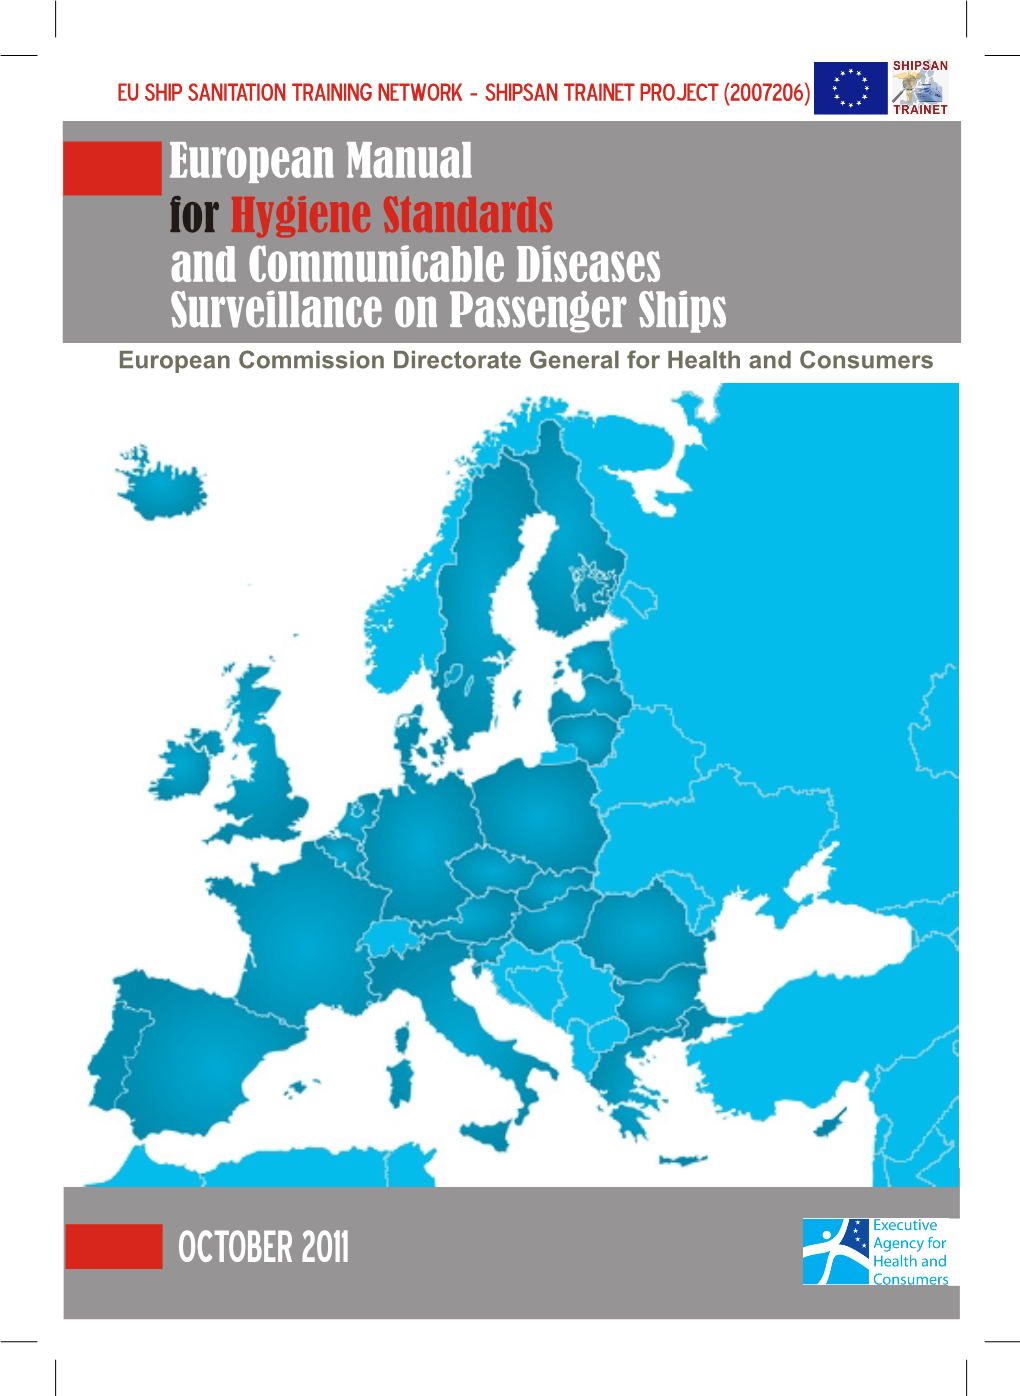 European Commission Directorate General for Health and Consumers